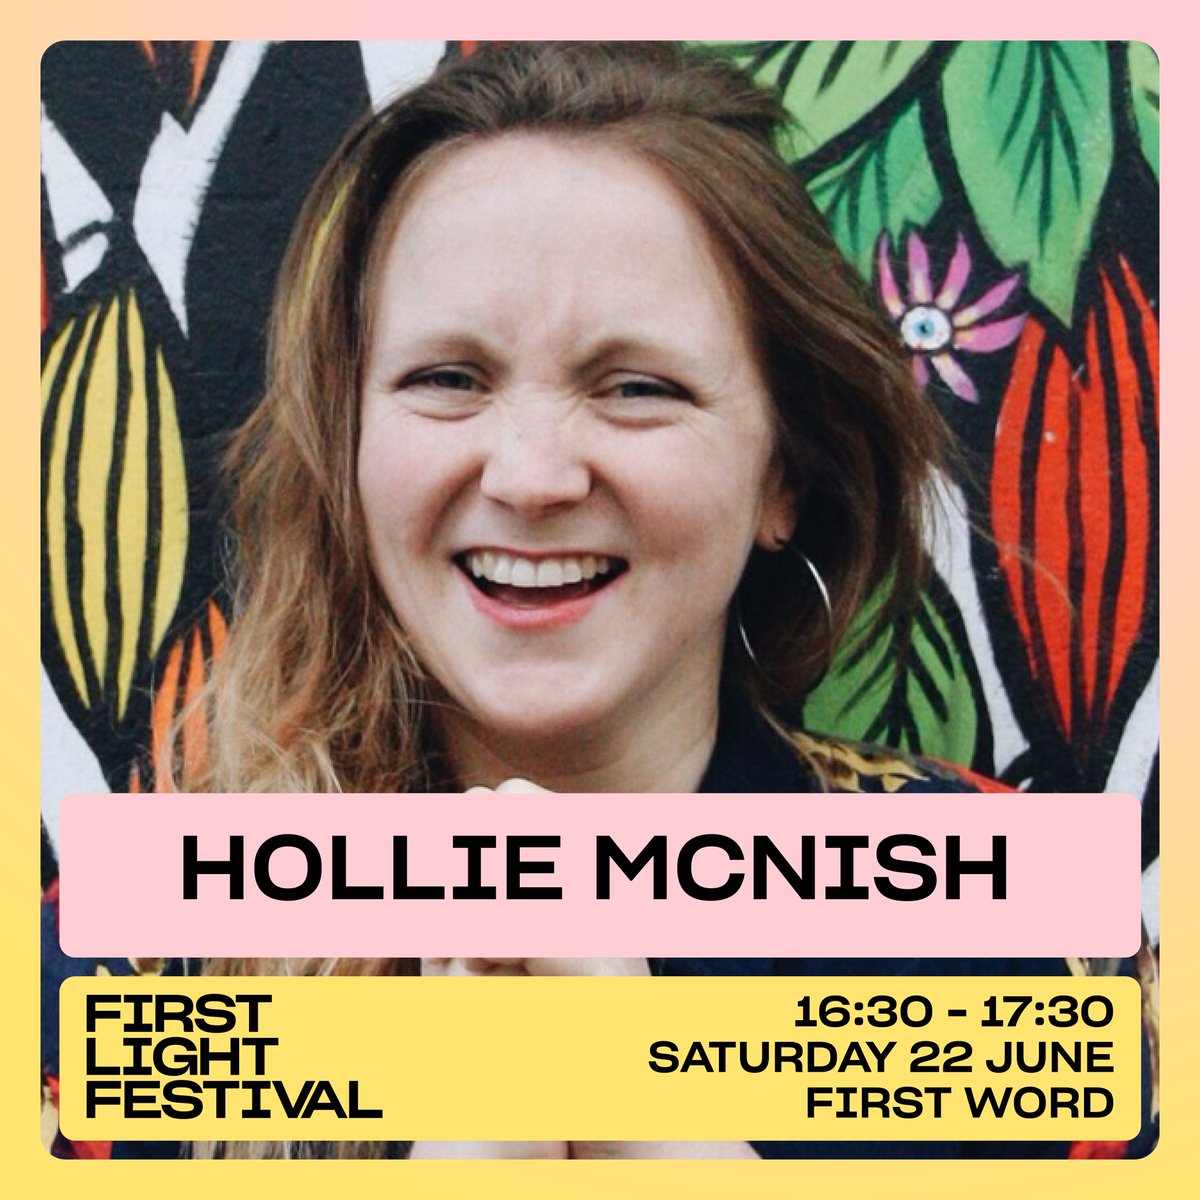 After selling out shows up and down the UK, @holliepoetry is back with a brand new book, Lobster. 🦞 Expect adult content gift-wrapped in gorgeously crafted poetry, when this bestselling writer gives us a live reading at First Light Festival 2024! firstlightlowestoft.com/events-2024/ho…